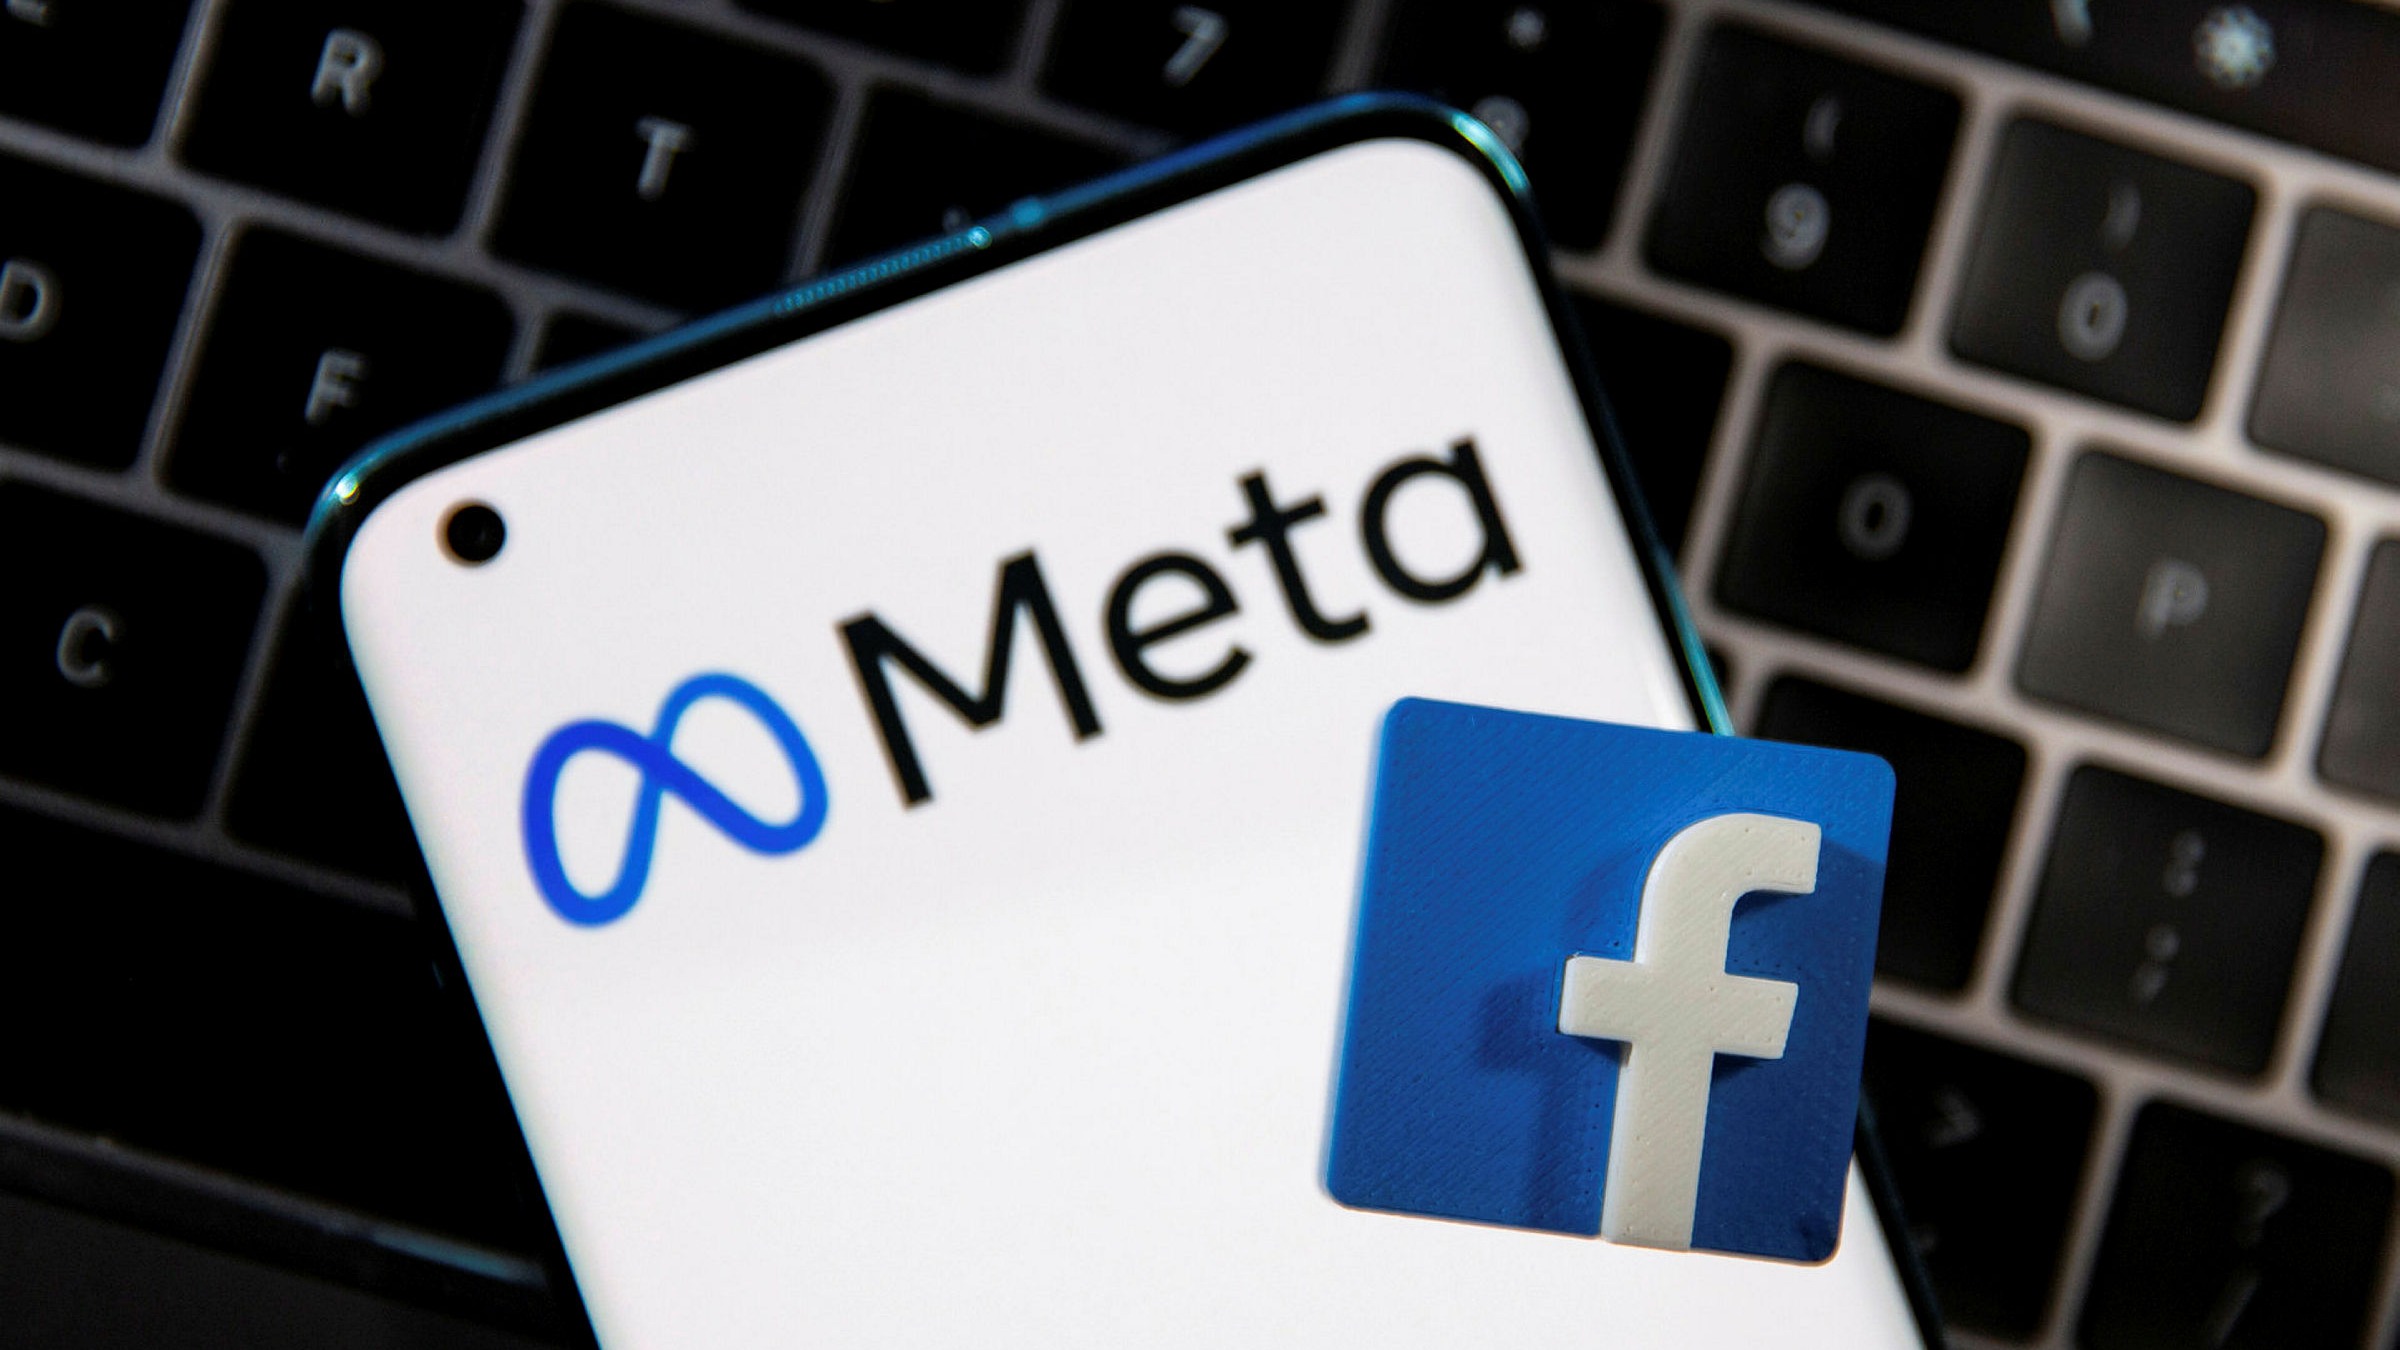 Meta launches Community Chats for Facebook and Messenger